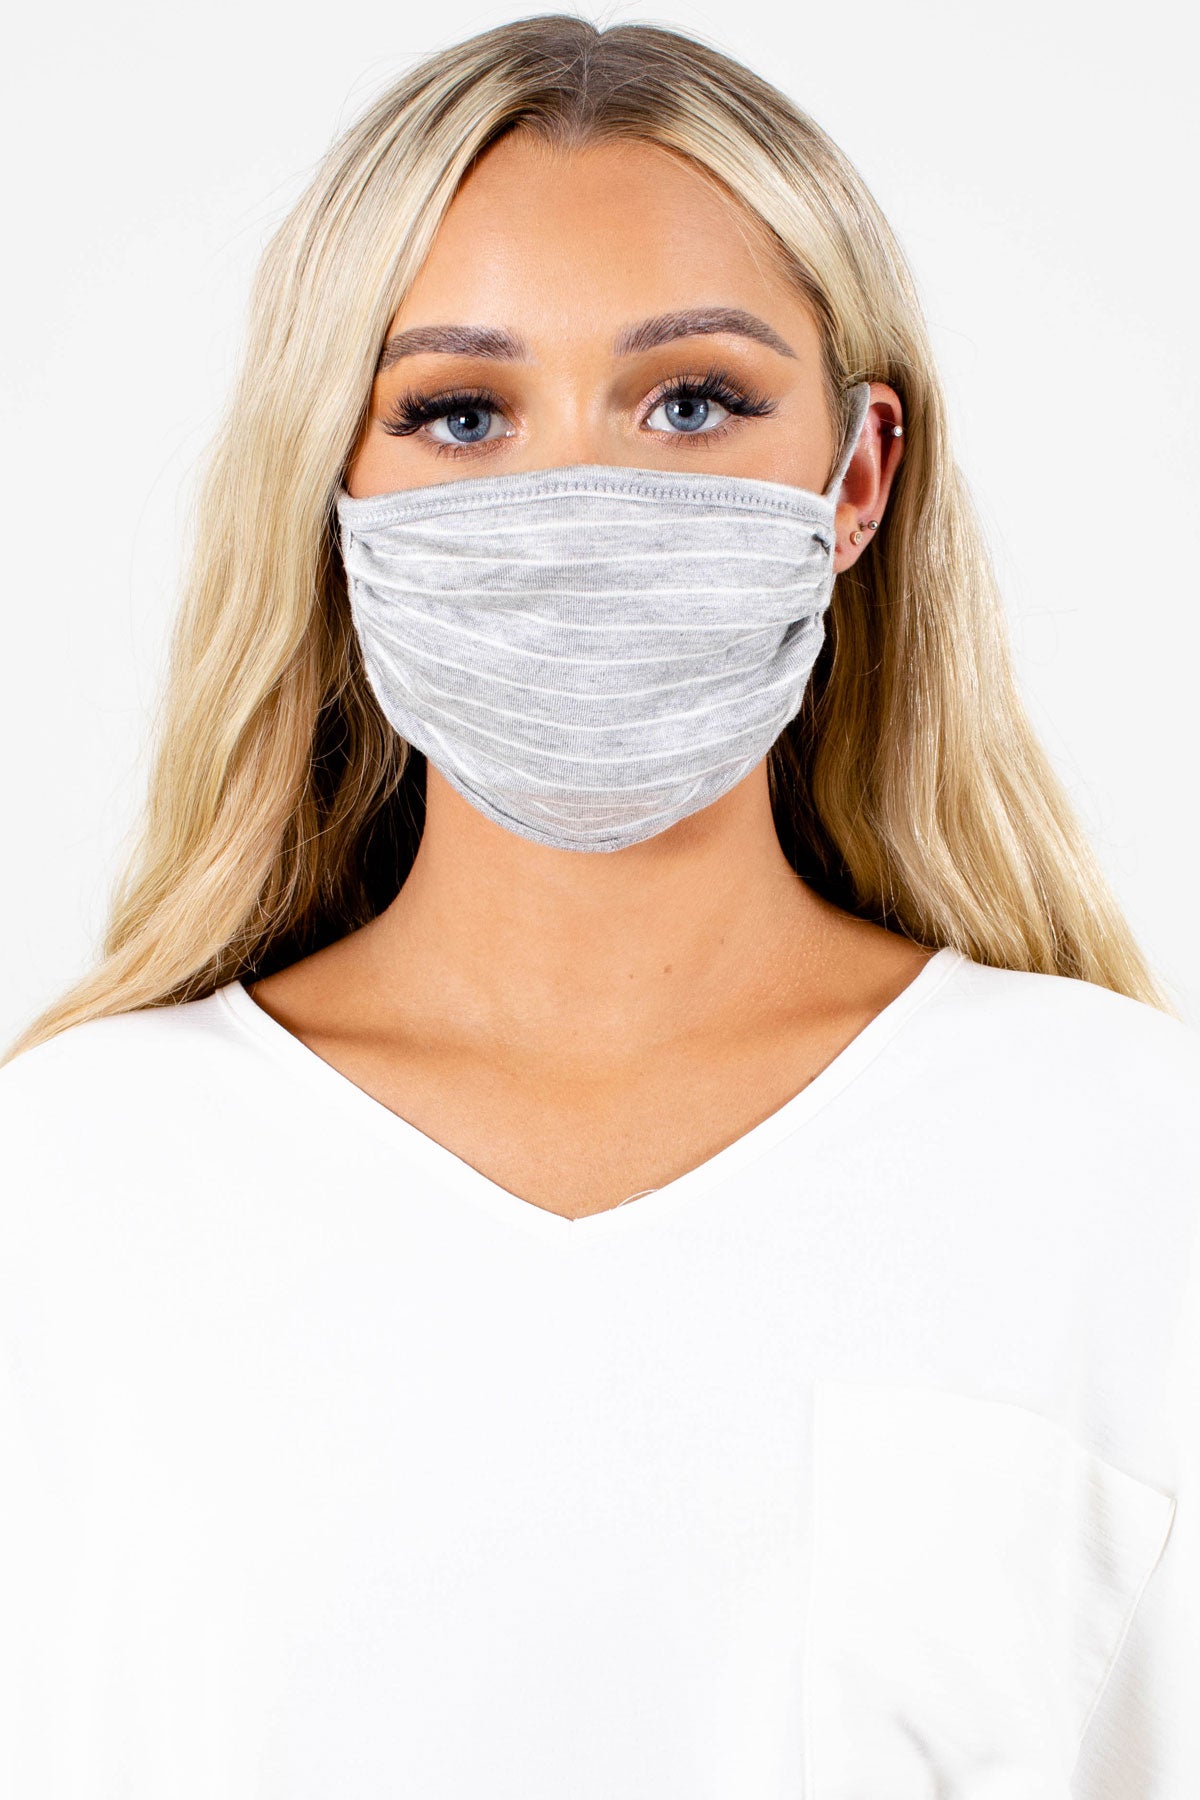 Gray and White Striped Boutique Face Masks for Women